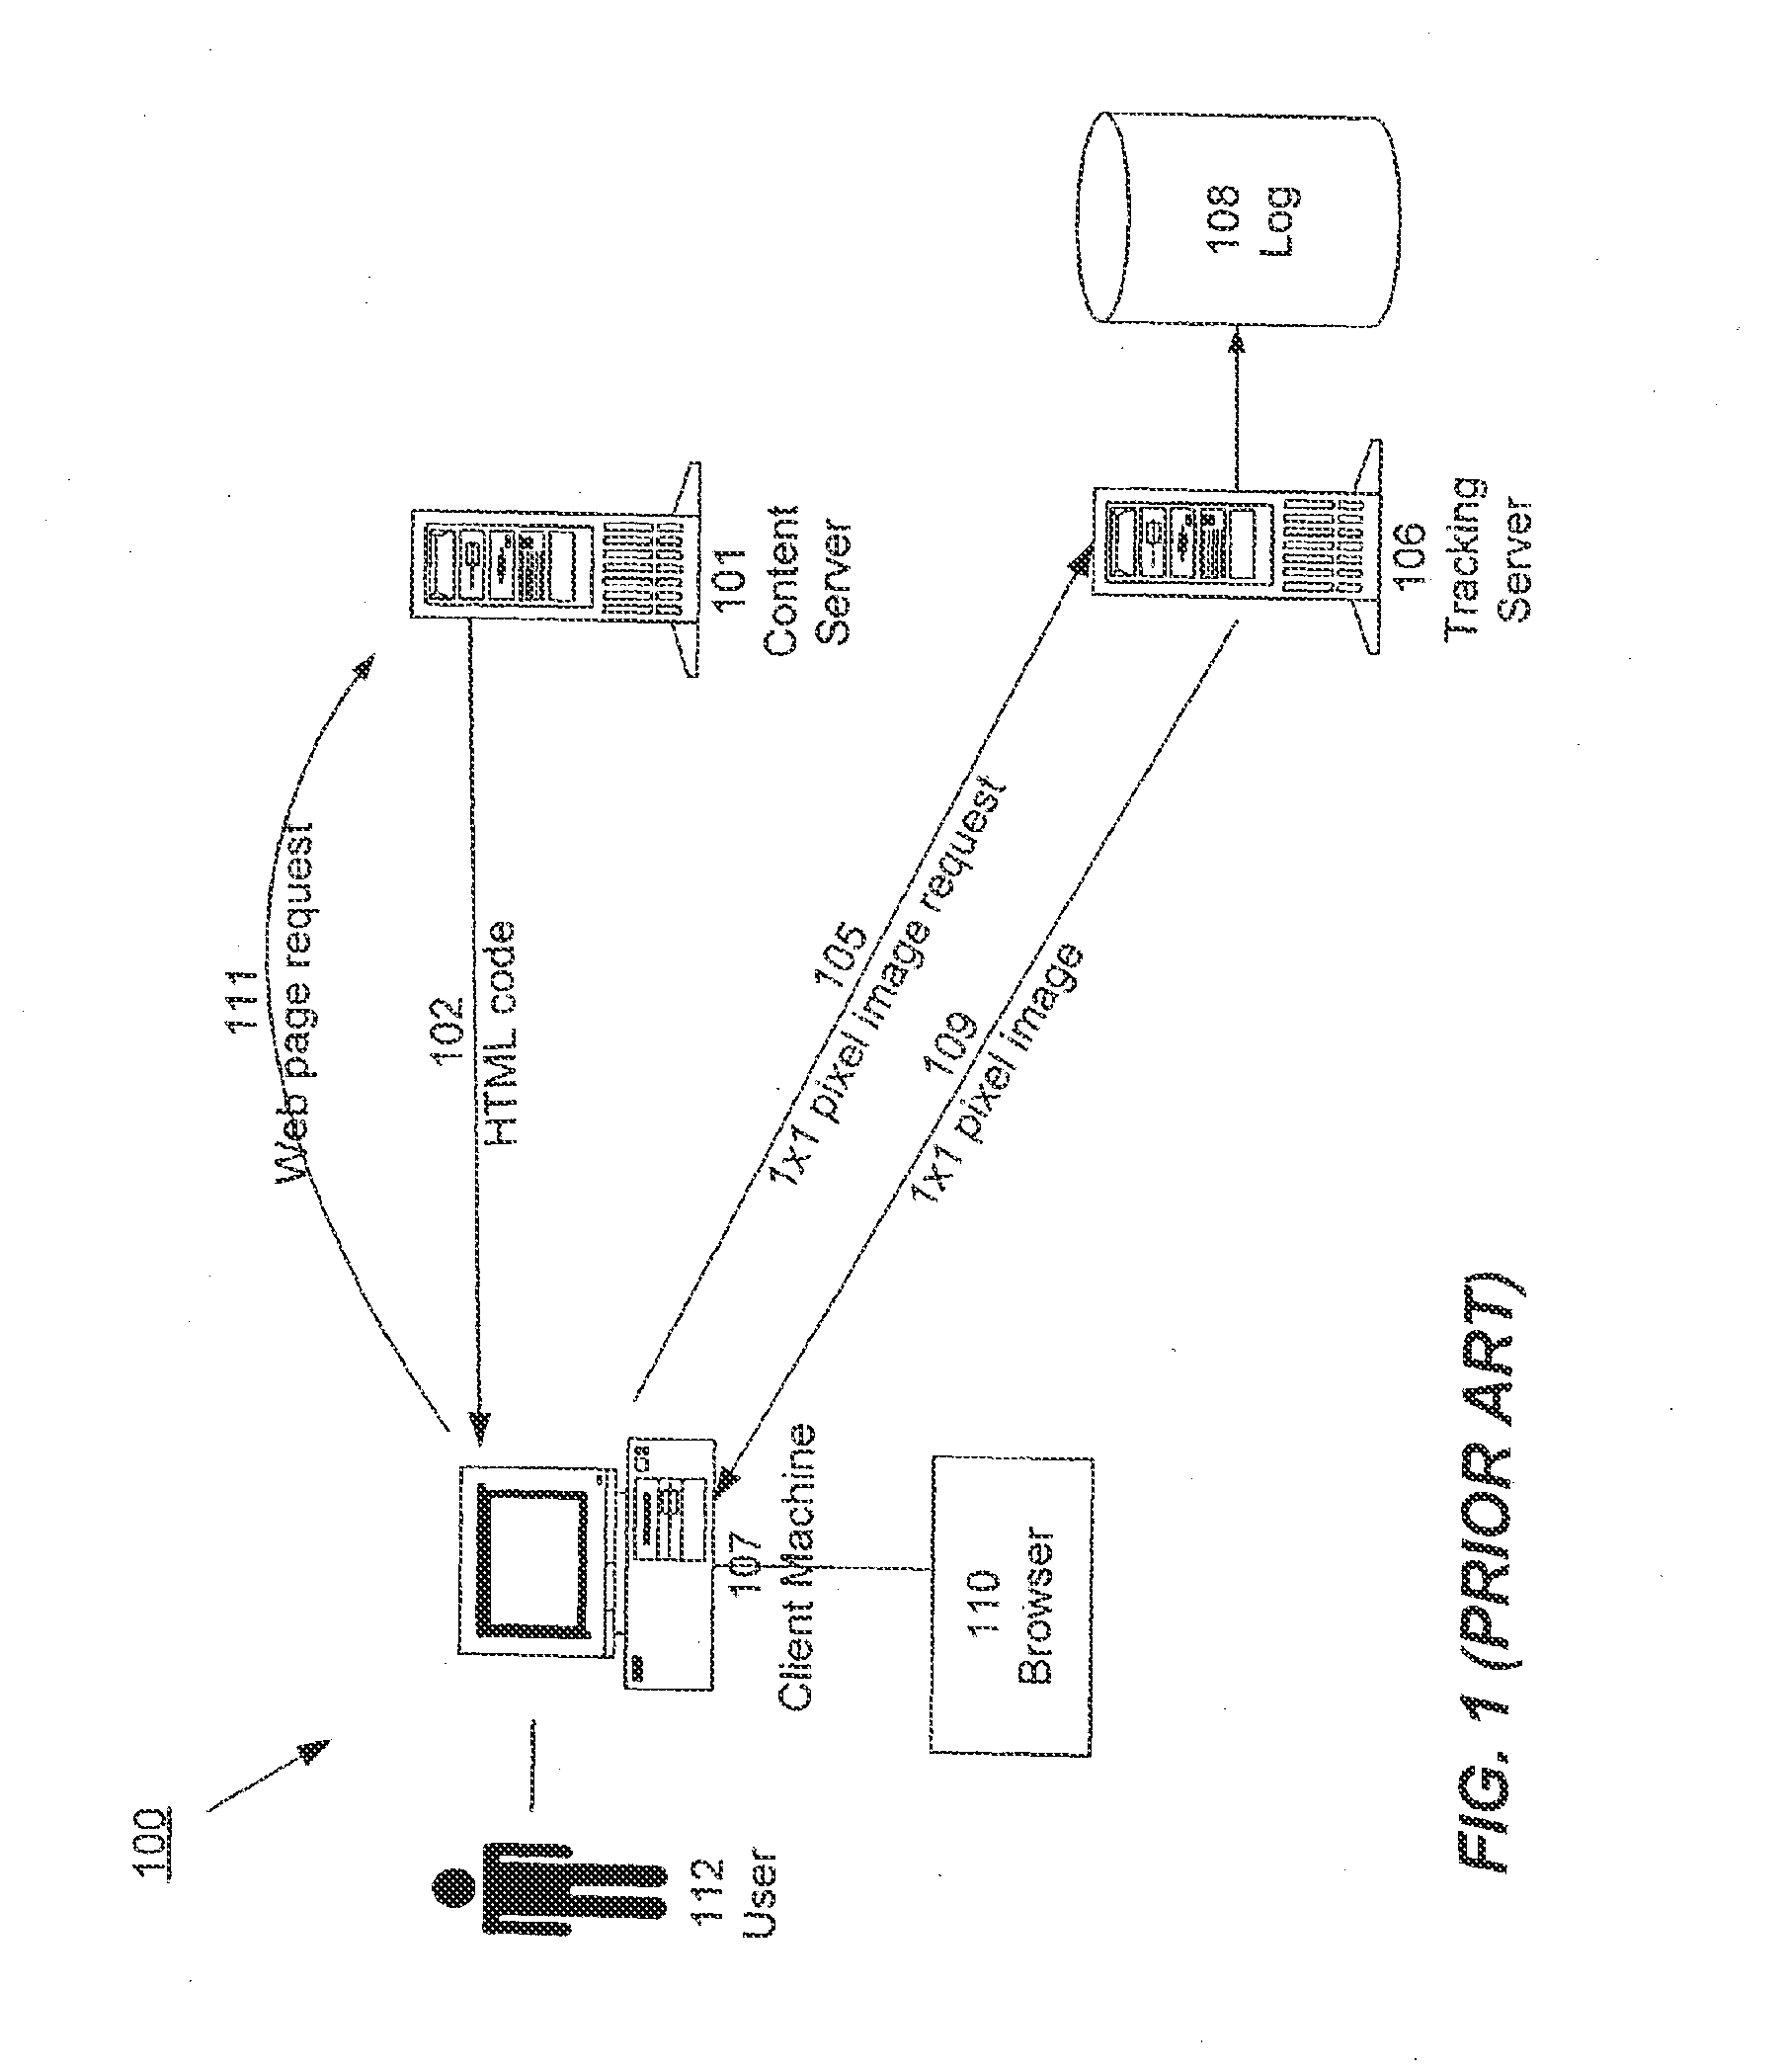 Distributed Data Collection and Aggregation